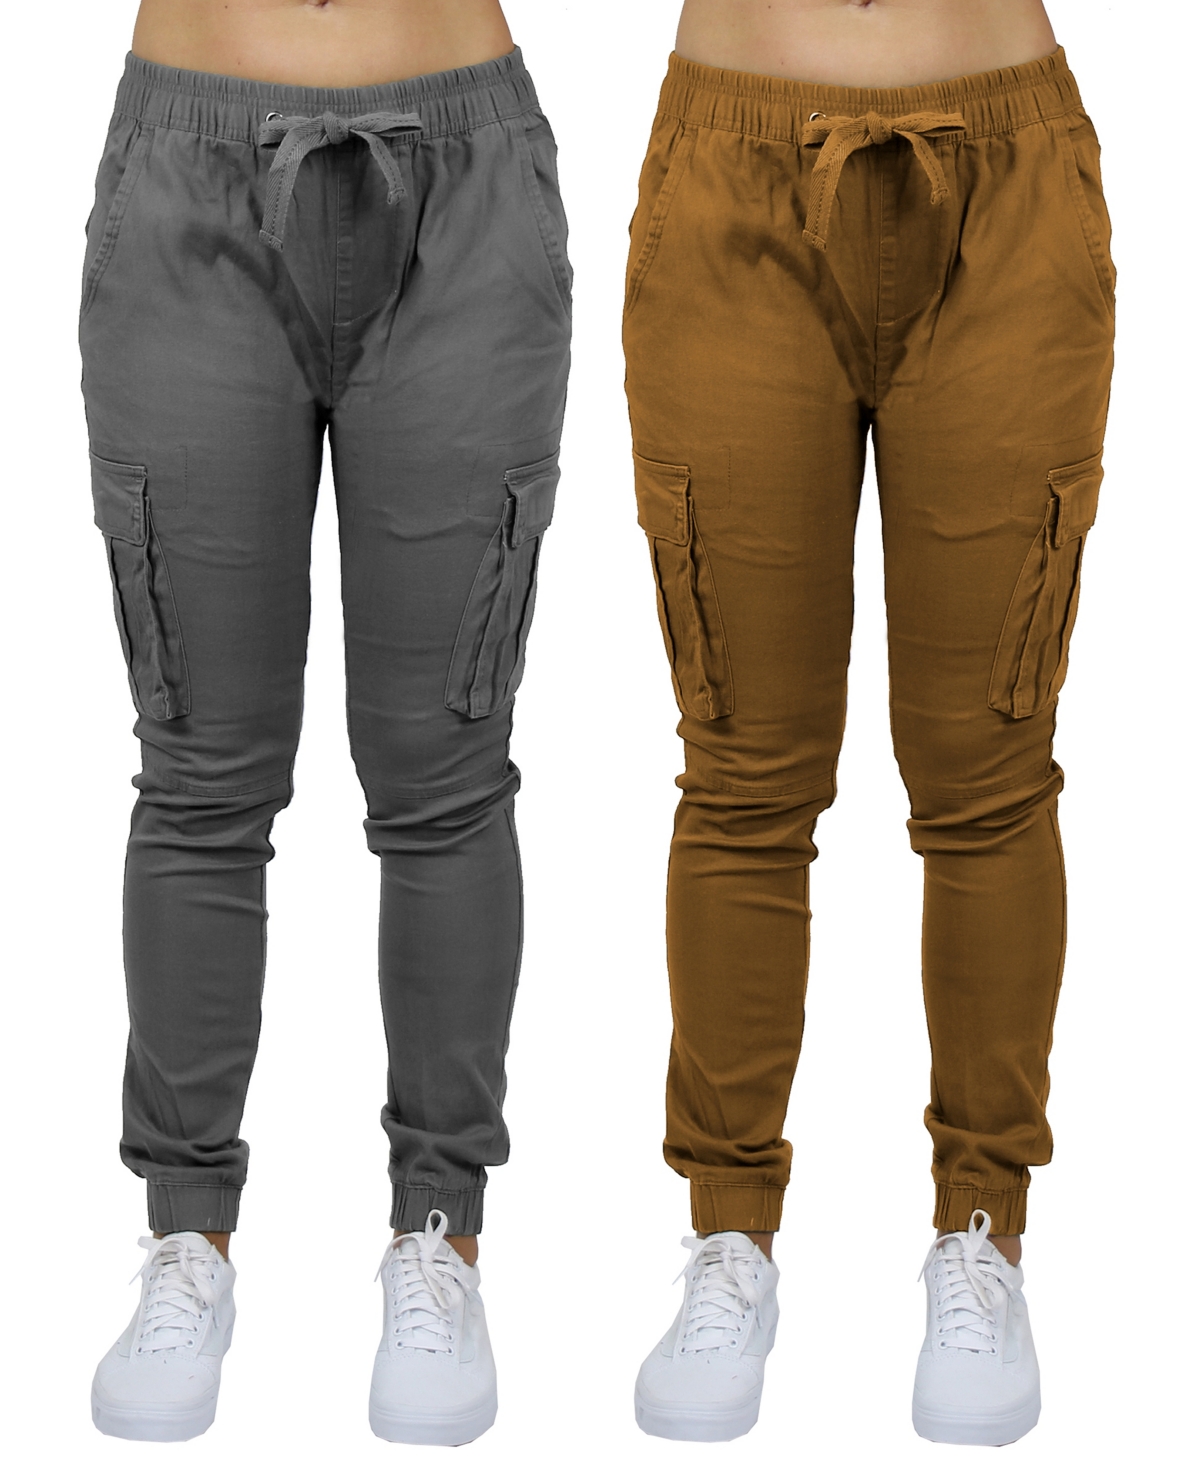 Women's Loose Fit Cotton Stretch Twill Cargo Joggers Set, 2 Pack - Navy, Woodland